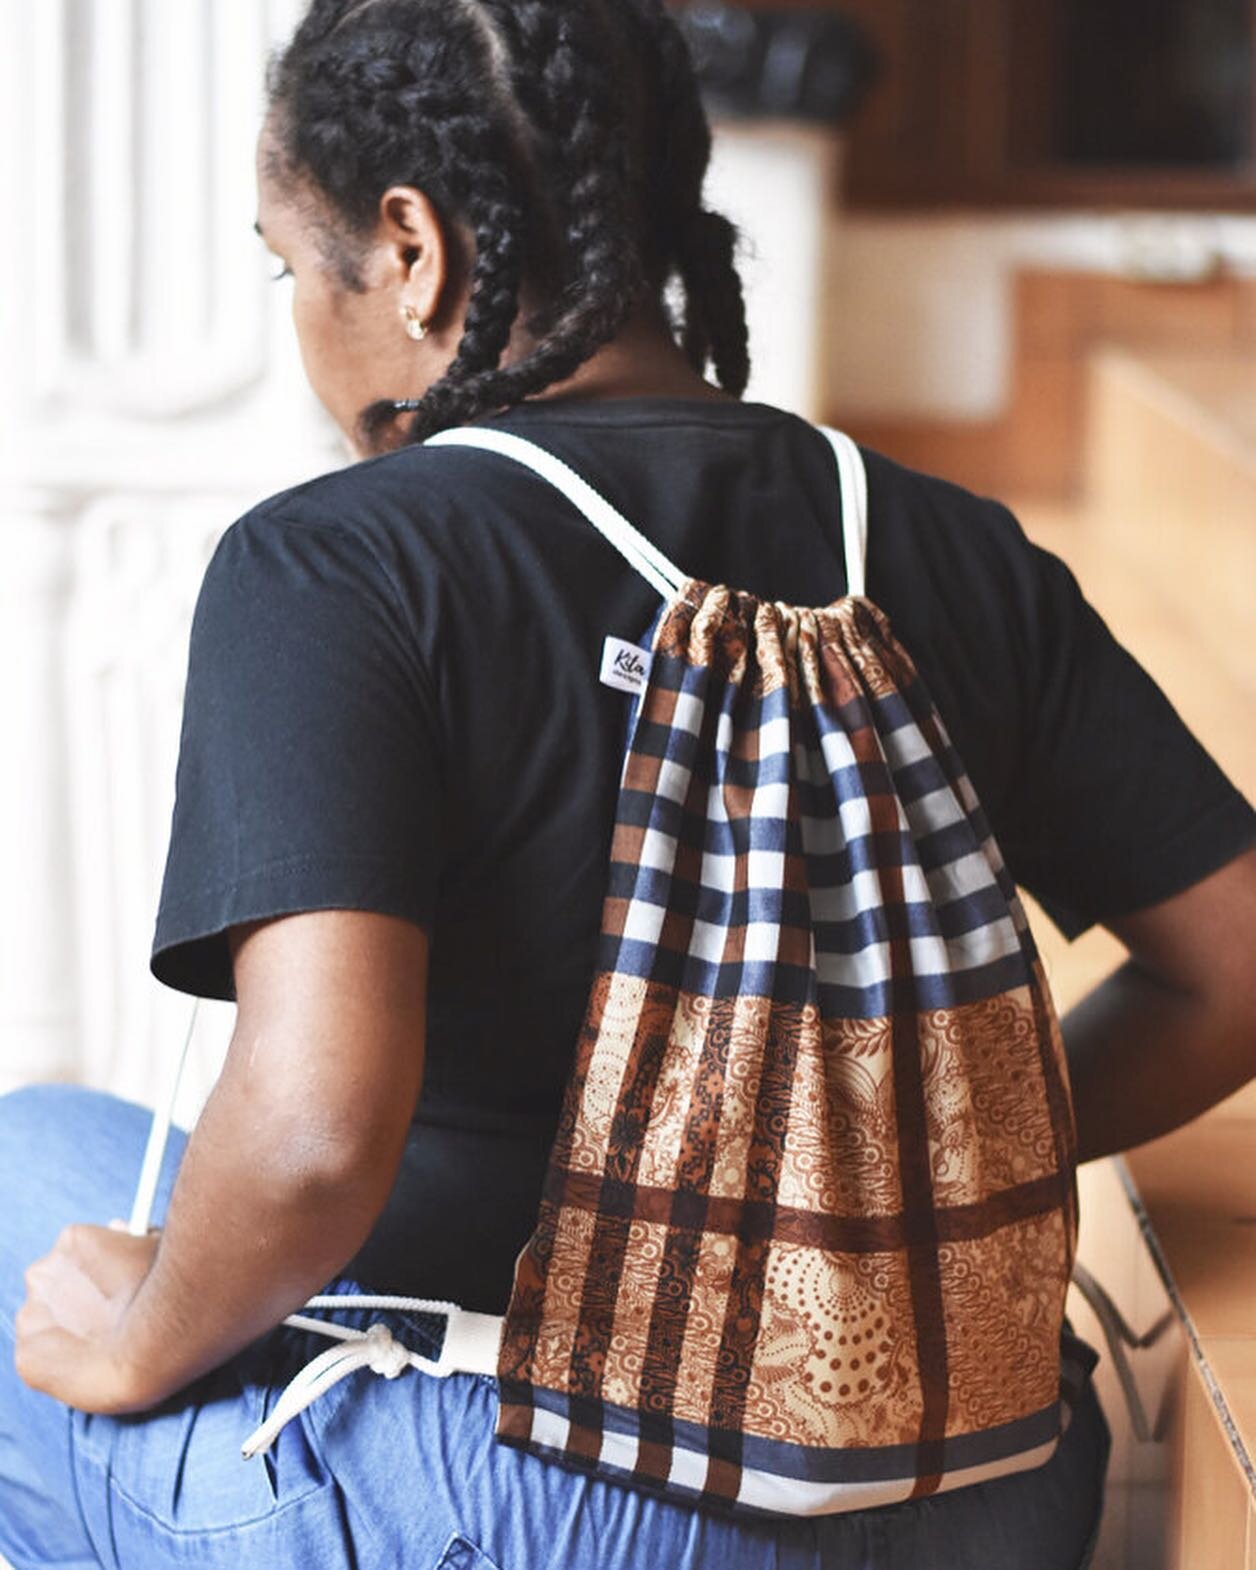 Another SALE is here!!! Get excited because this week we are offering 20% off bags and scarves with the discount code: STYLEUP 

Get yours before the sale ends on May 2! 

.
.
.
Kita Designs creates handmade batik products and is focused on empowerin